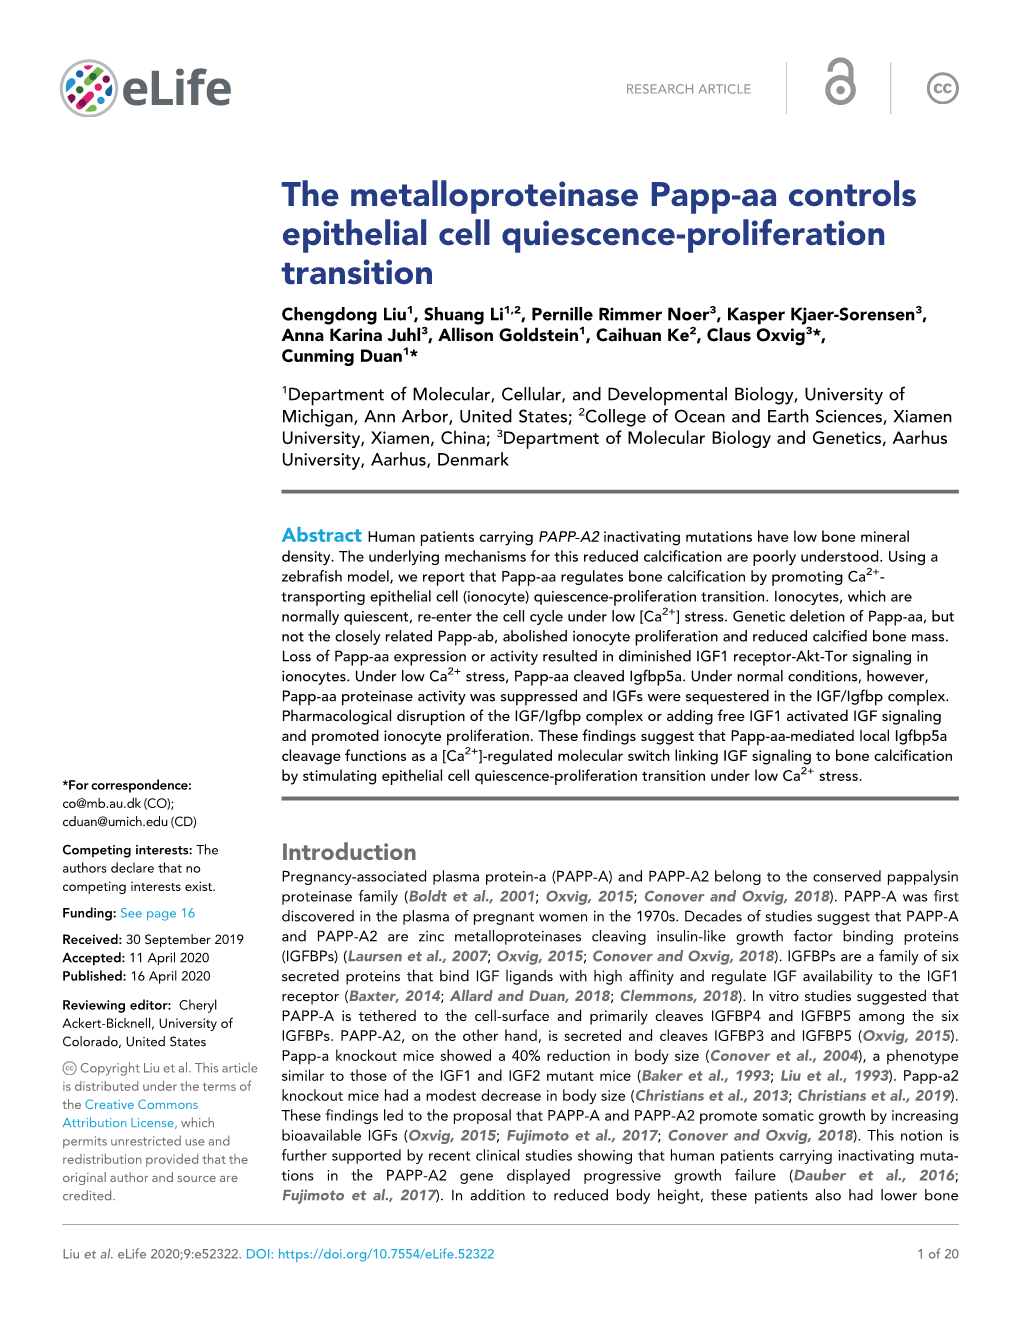 The Metalloproteinase Papp-Aa Controls Epithelial Cell Quiescence